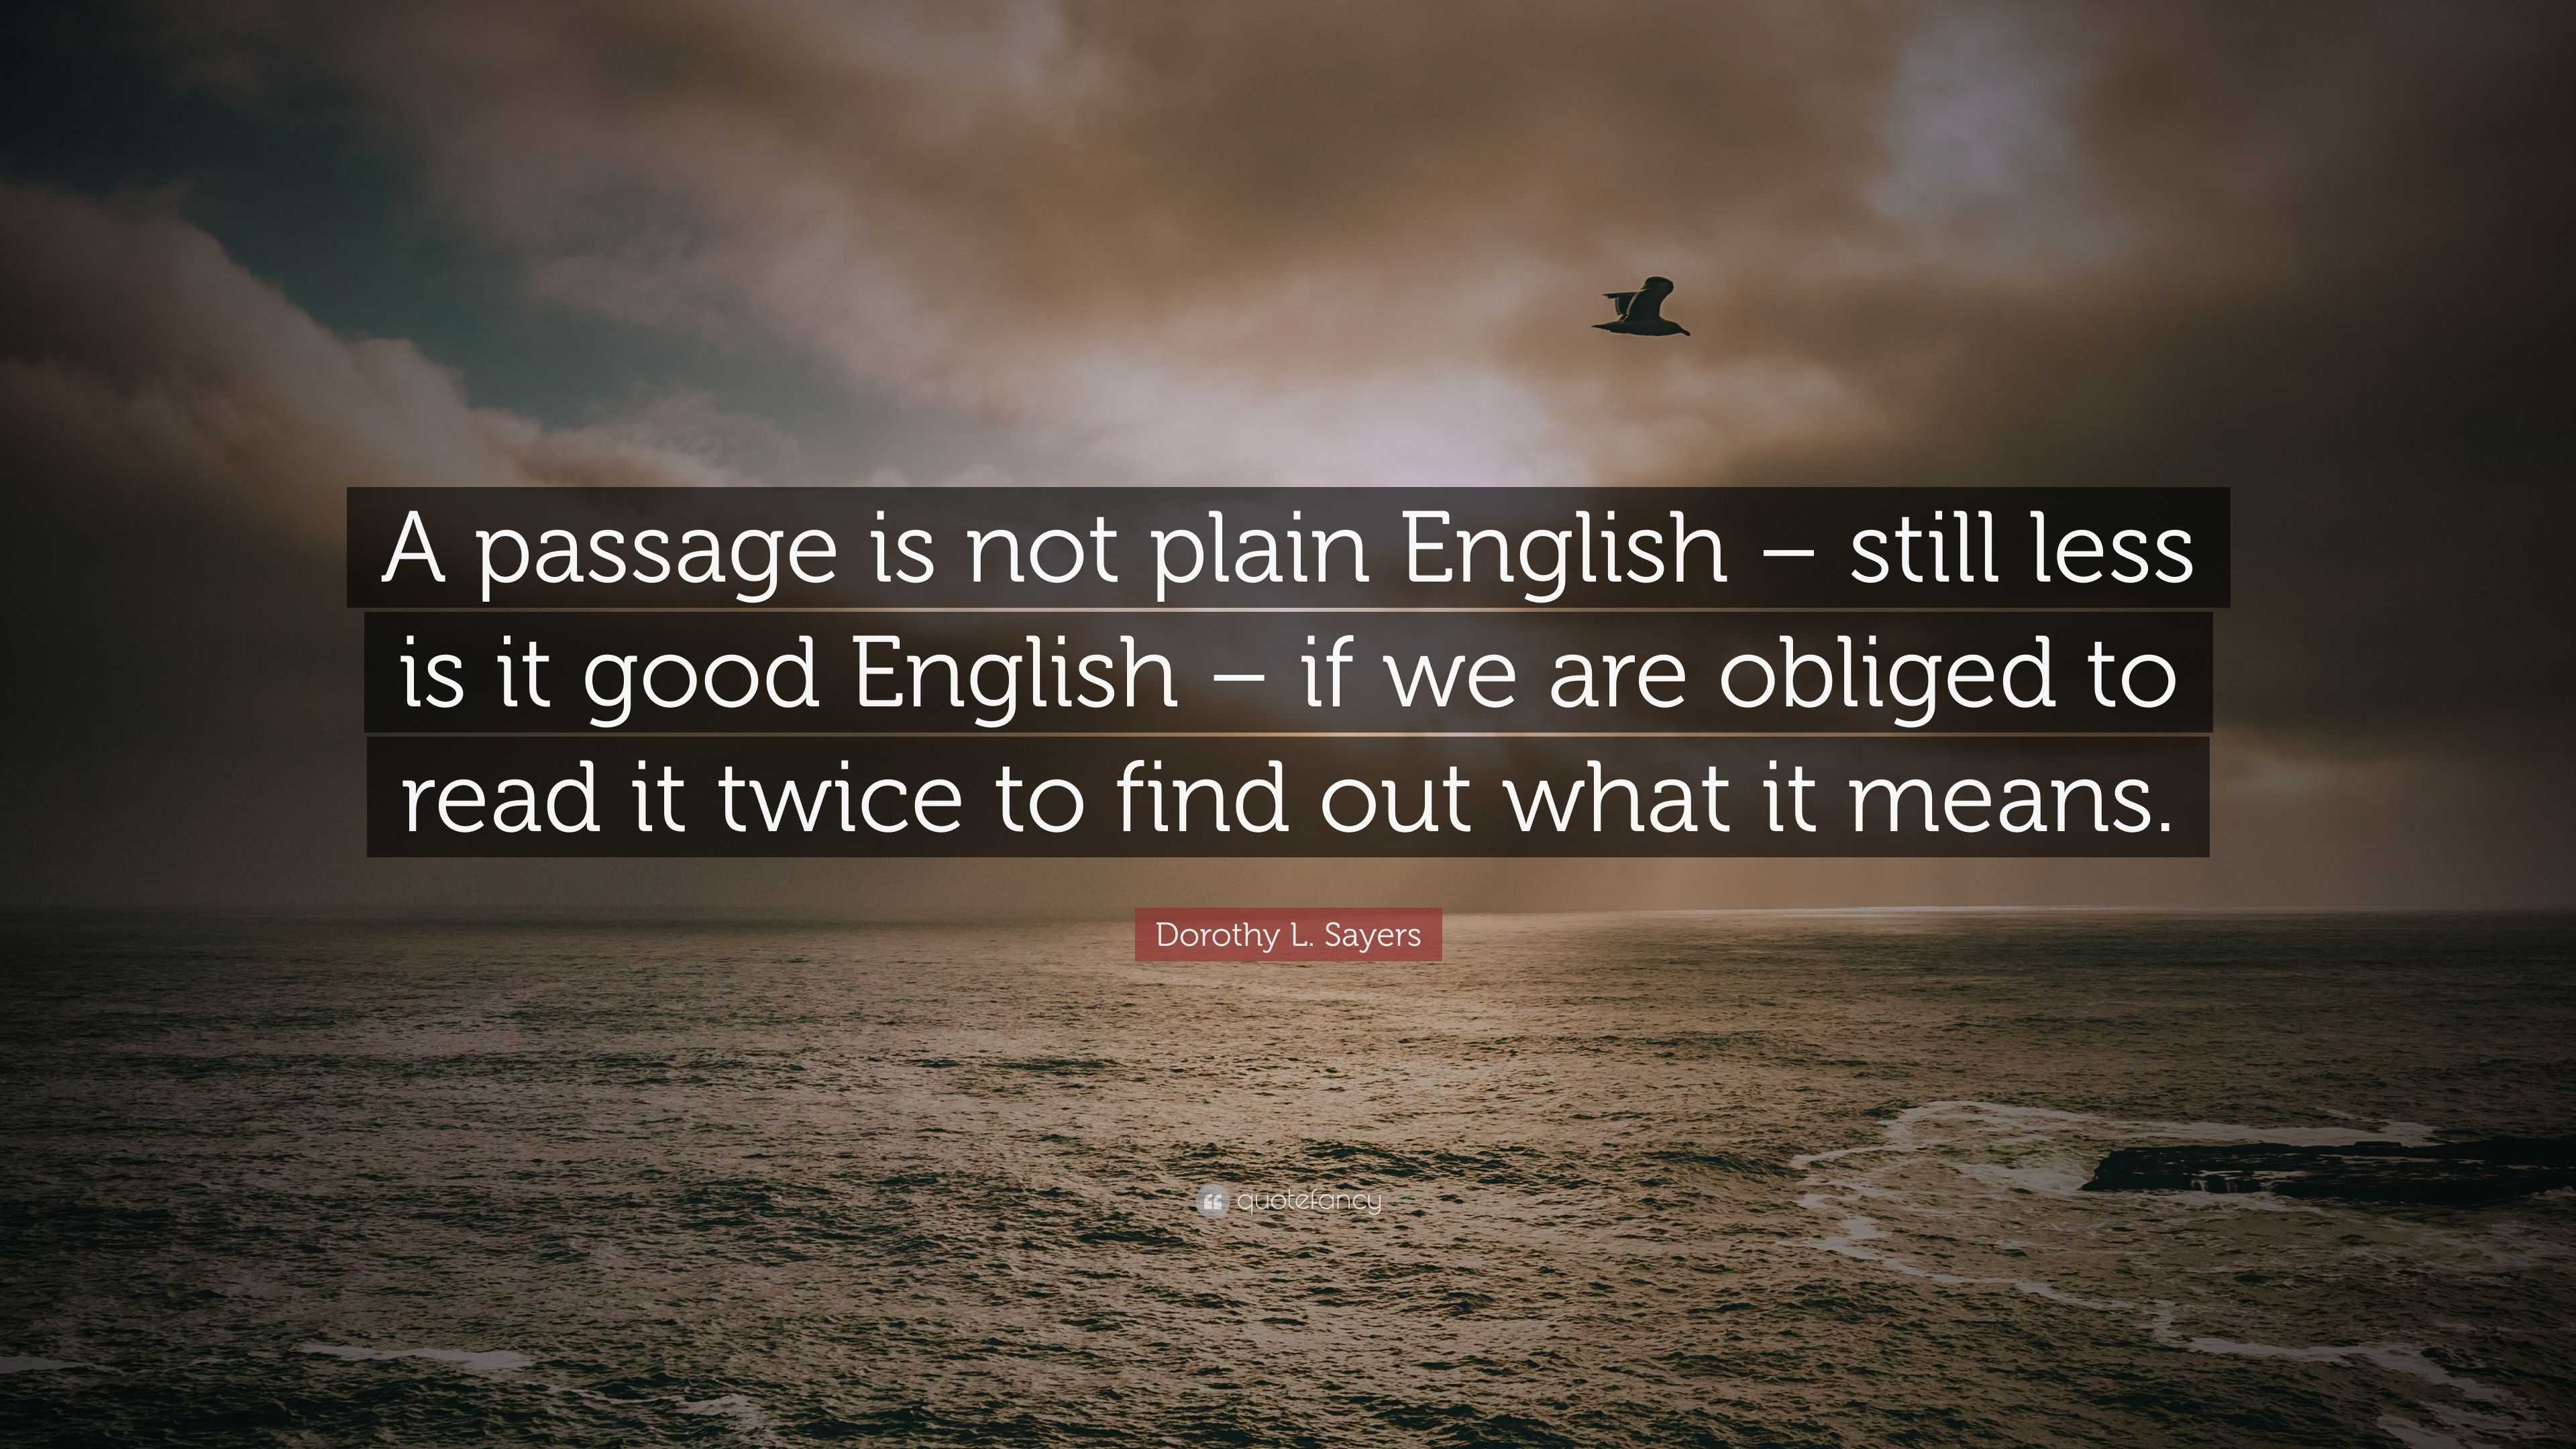 Dorothy L. Sayers Quote: “A passage is not plain English – still less ...